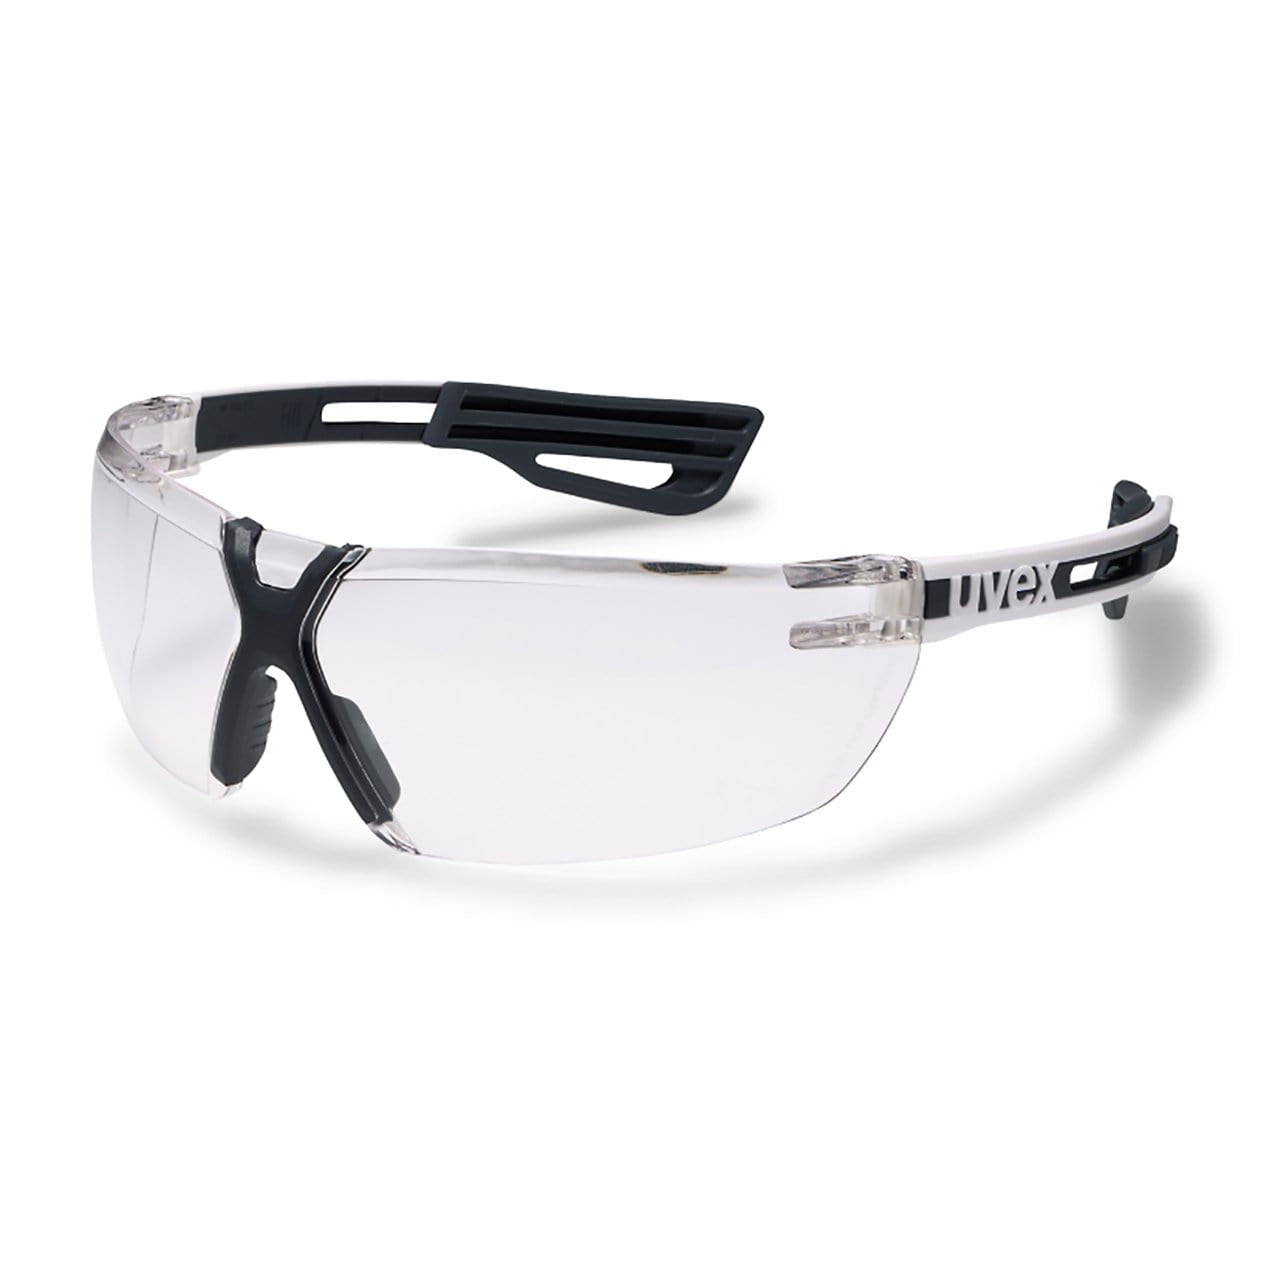 UVEX X-Fit Pro Eye Protection Spectacles